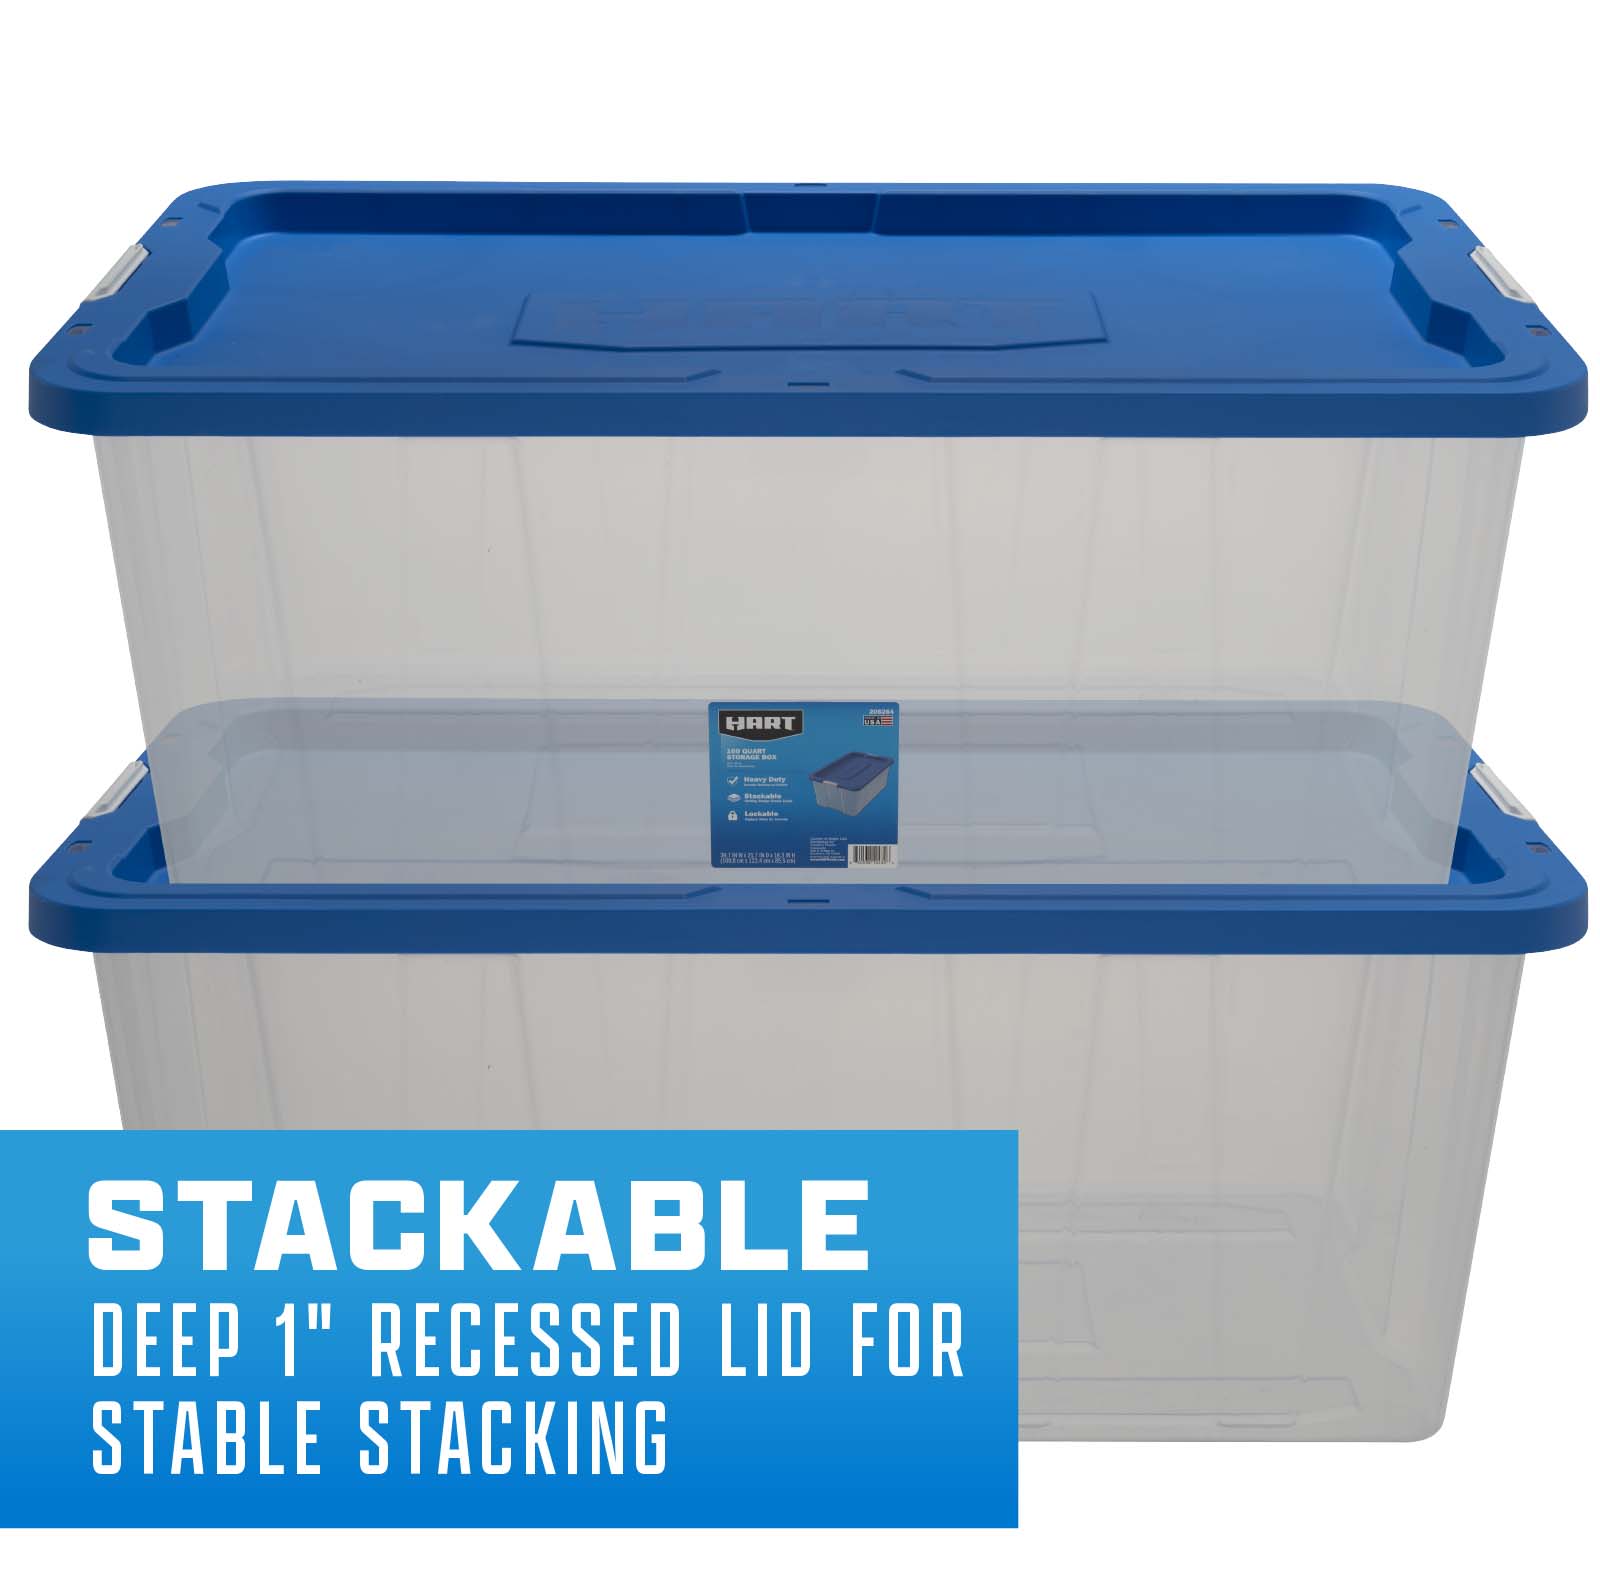 Stackable deep 1" recessed lid for stable stacking